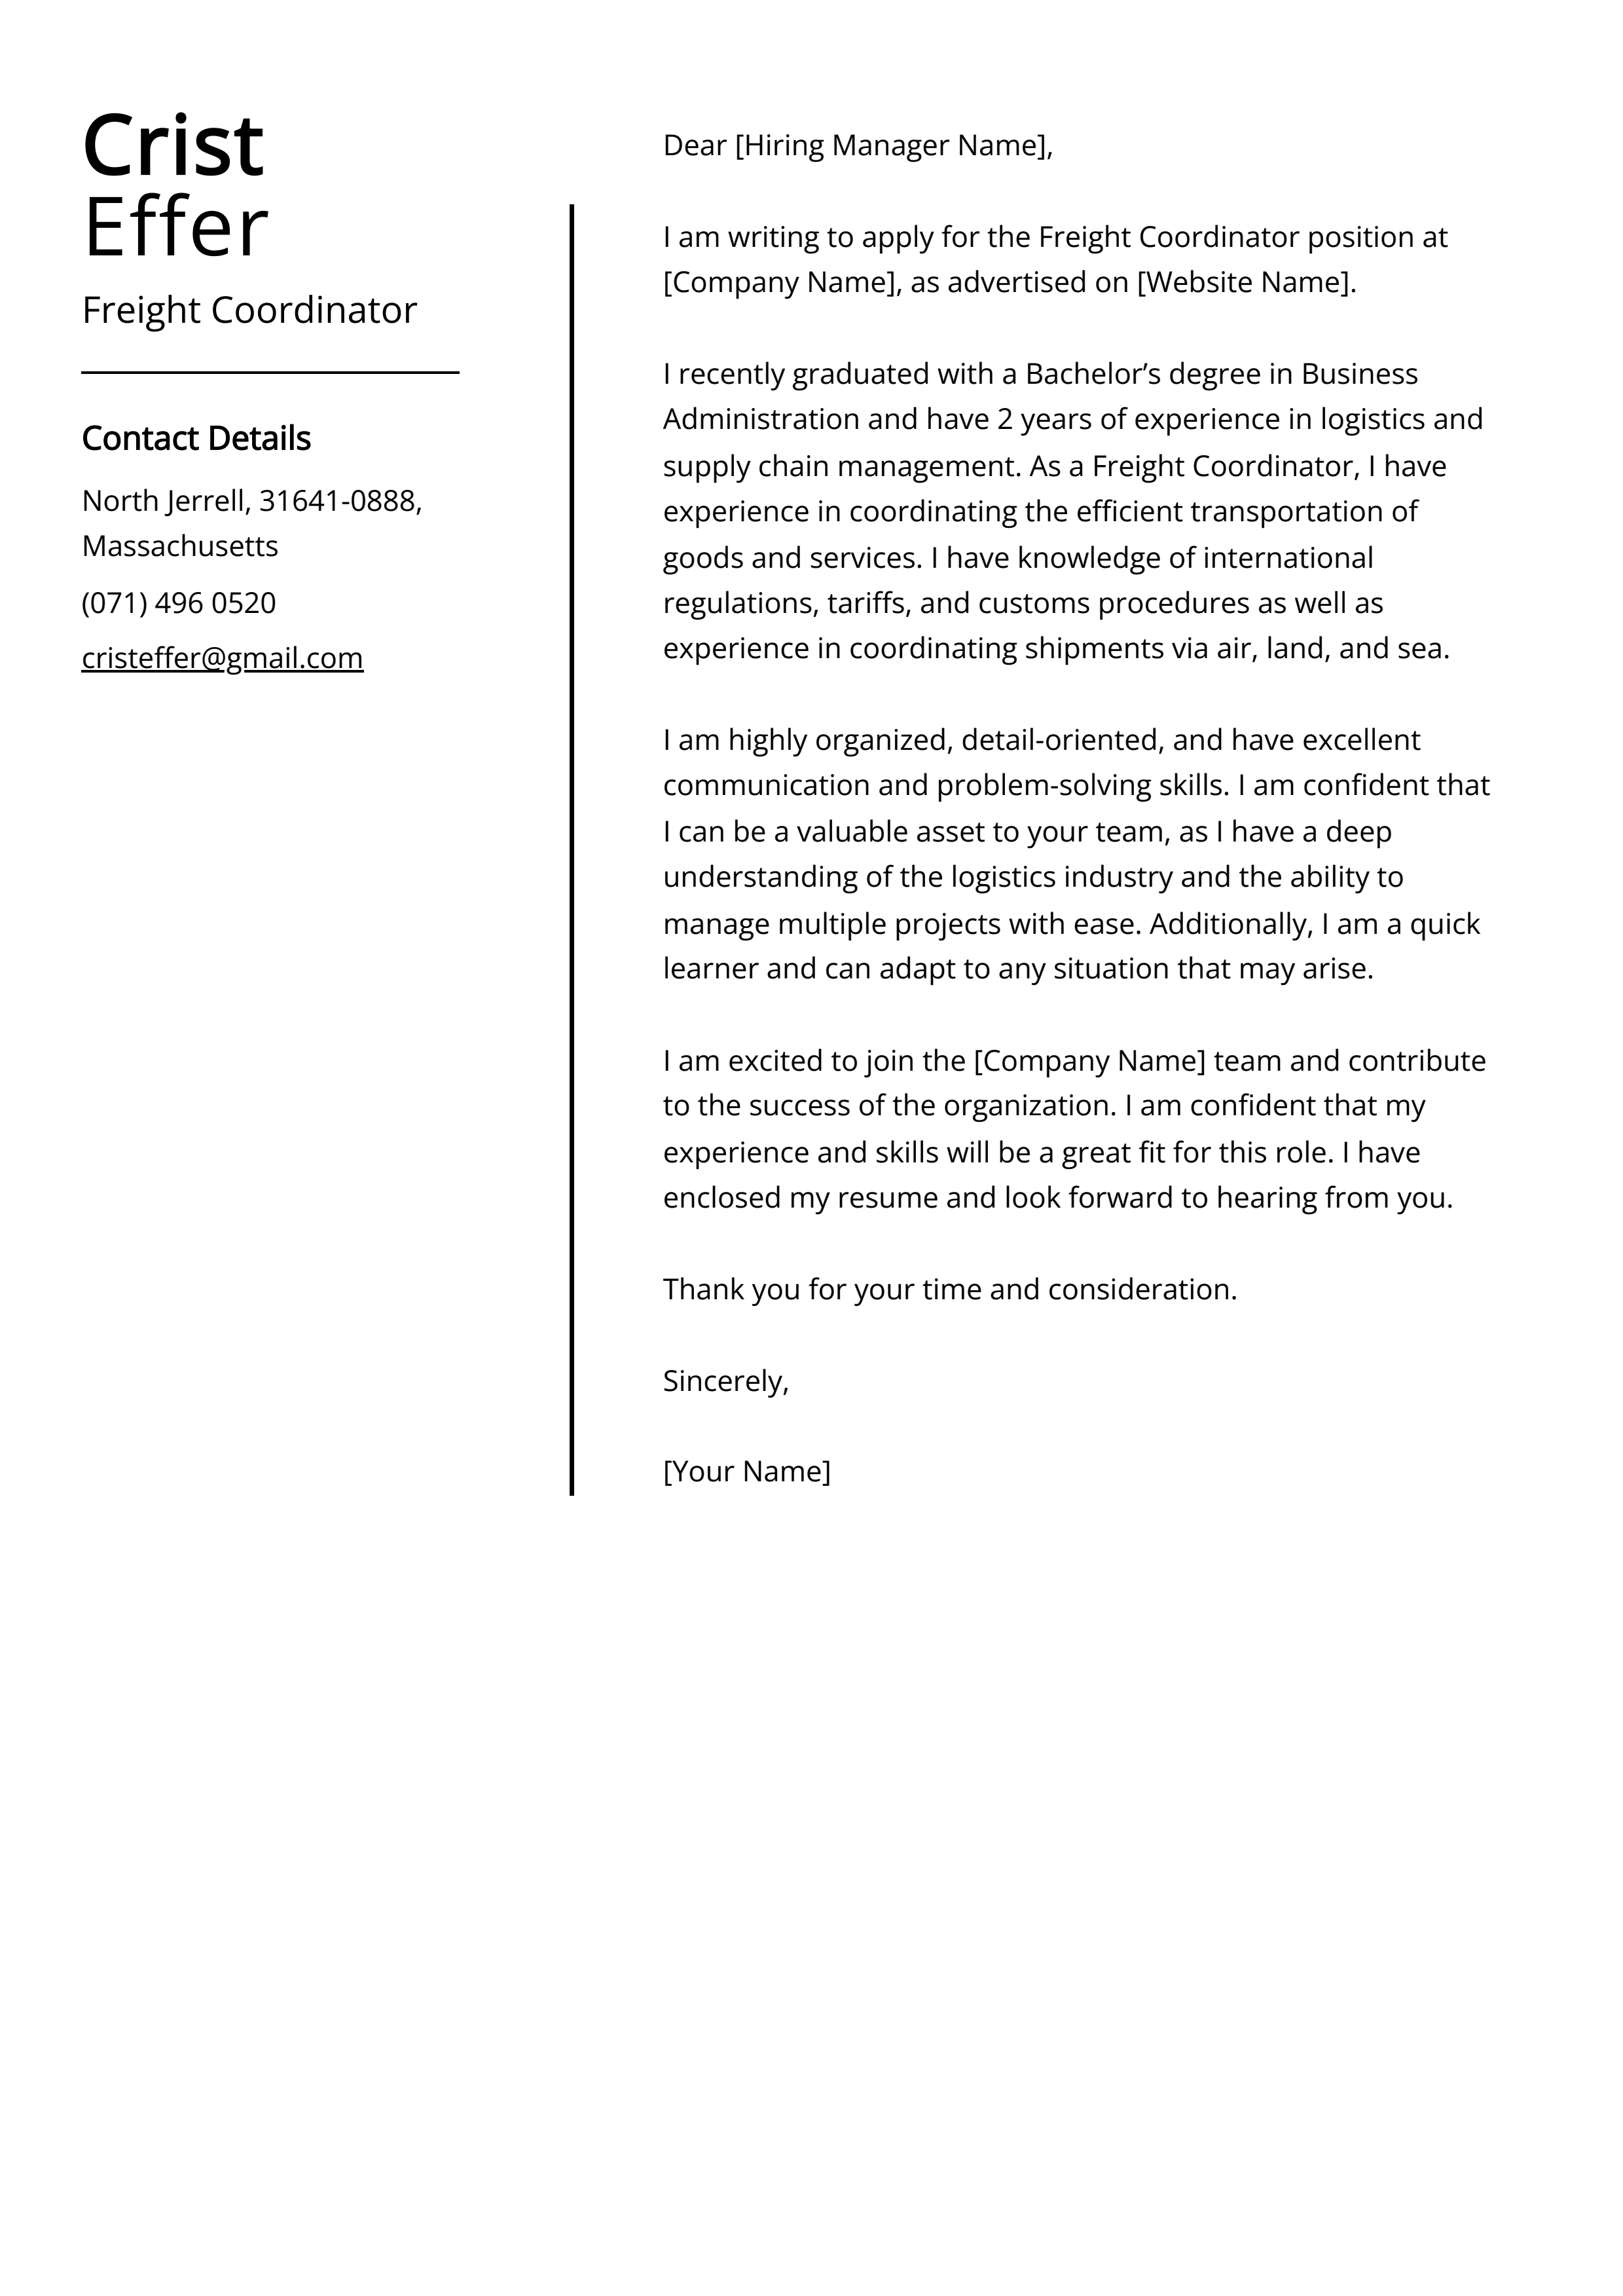 Freight Coordinator Cover Letter Example